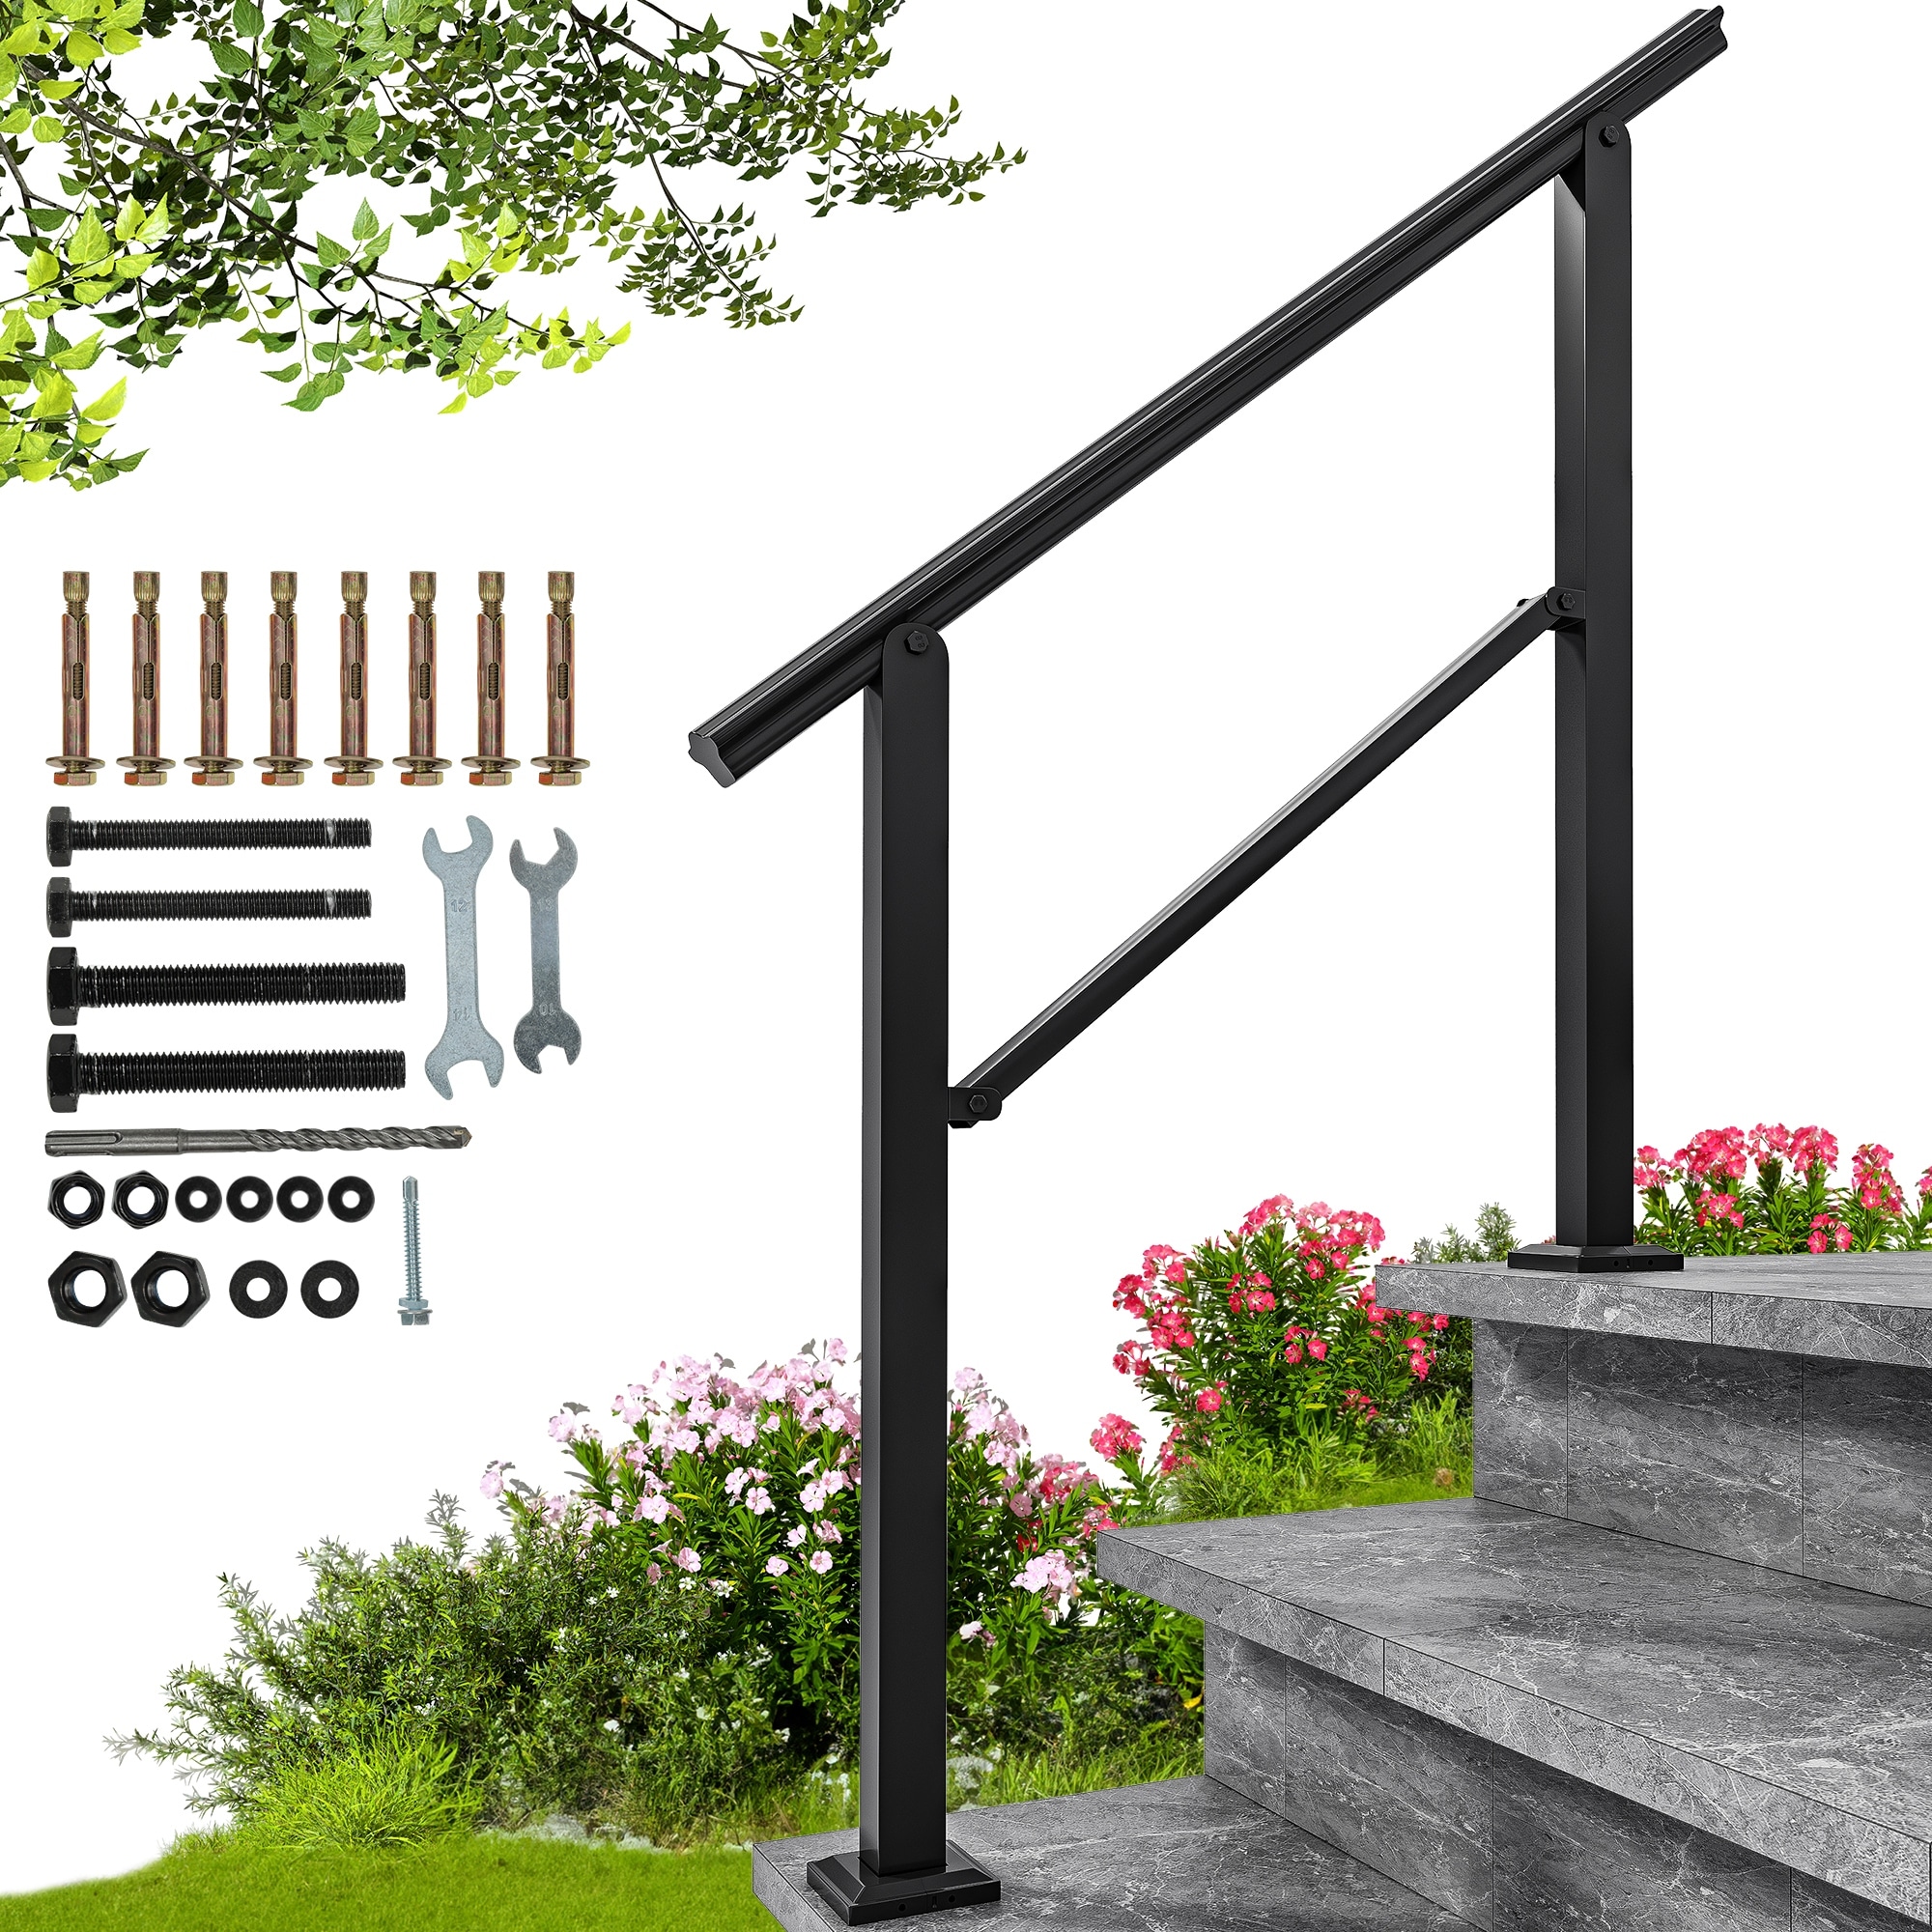 VEVOR Outdoor Stair Railing, Fits for 1-5 Steps Transitional